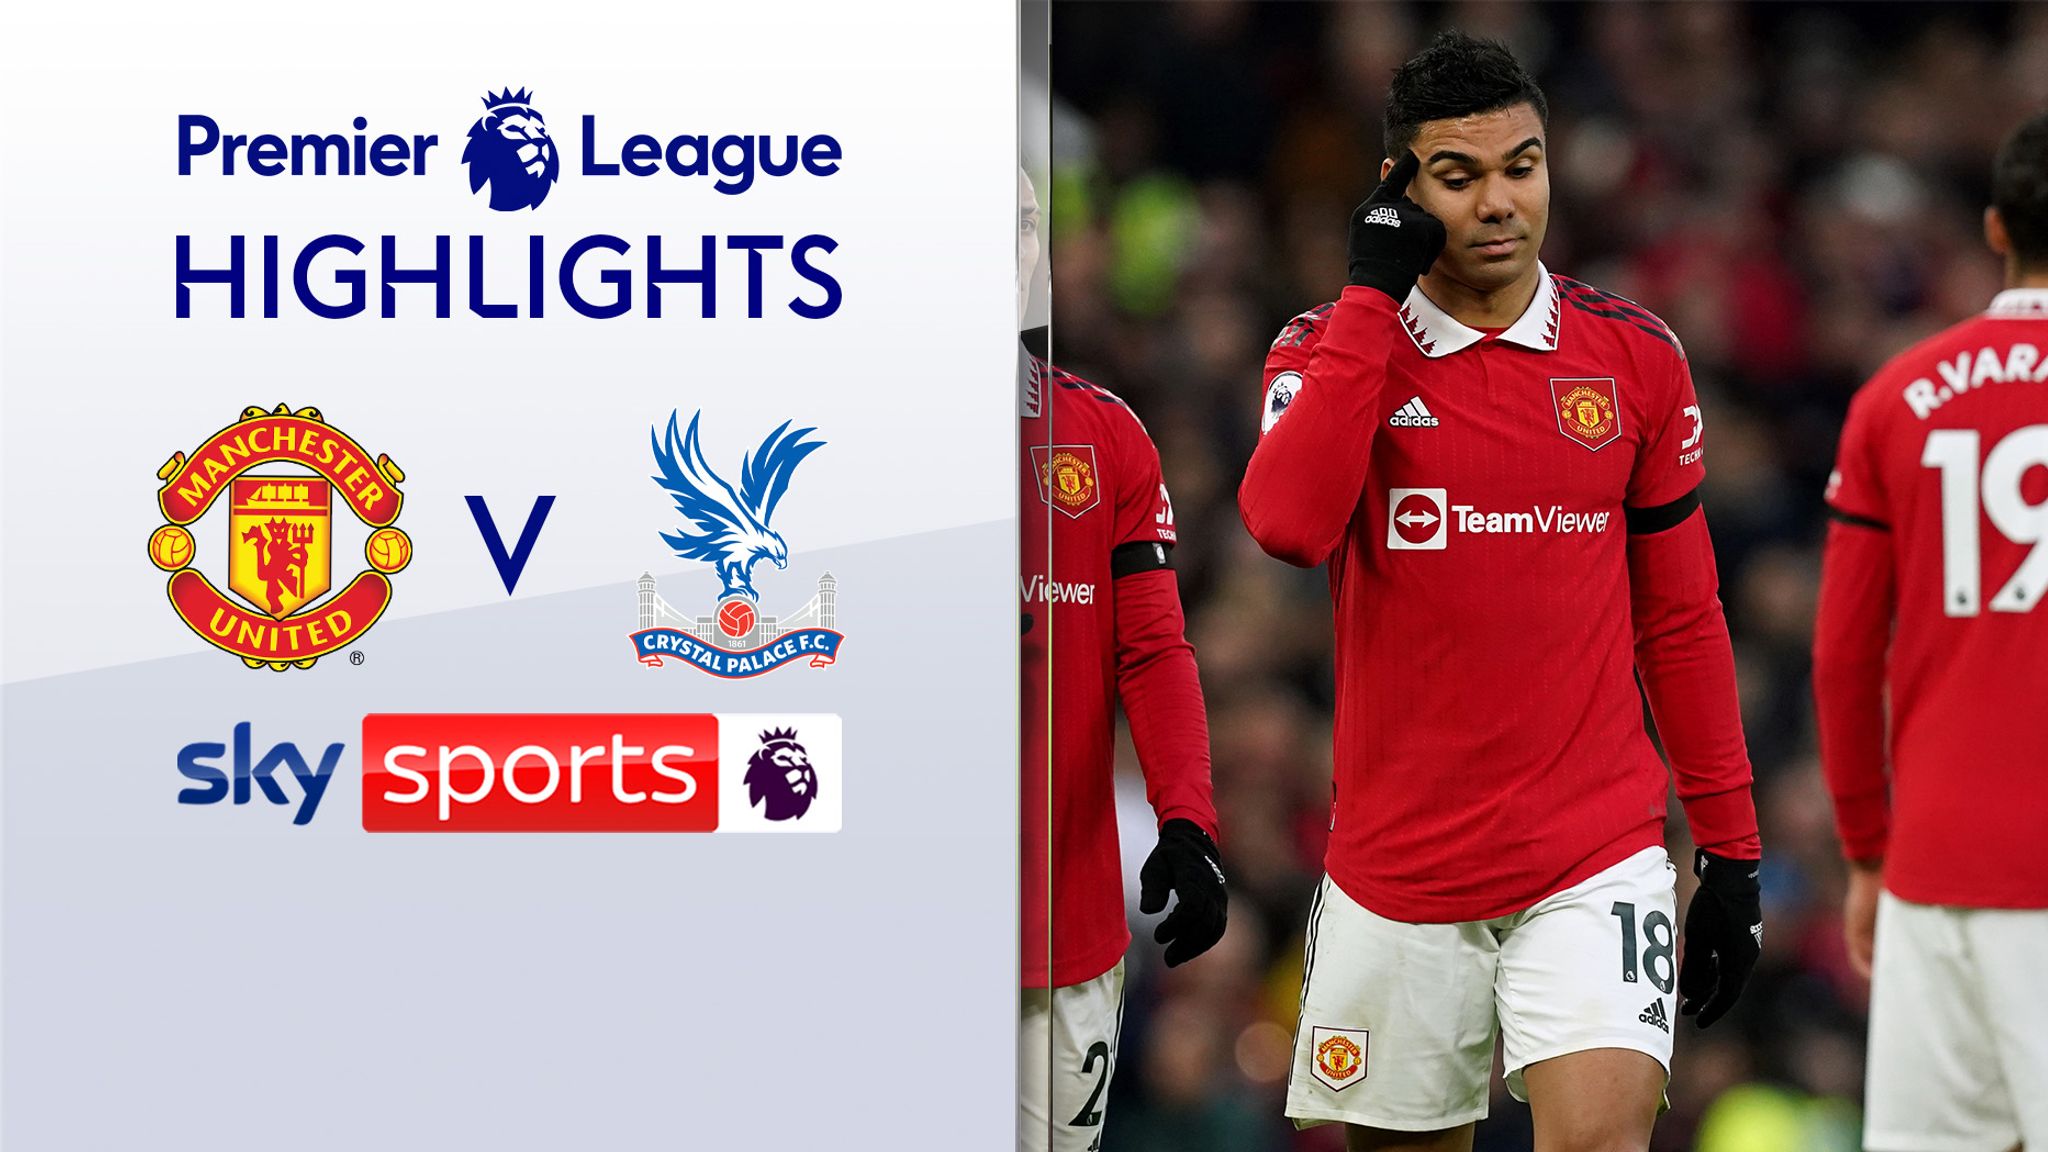 Manchester United 2-1 Crystal Palace Premier League highlights Video Watch TV Show Sky Sports